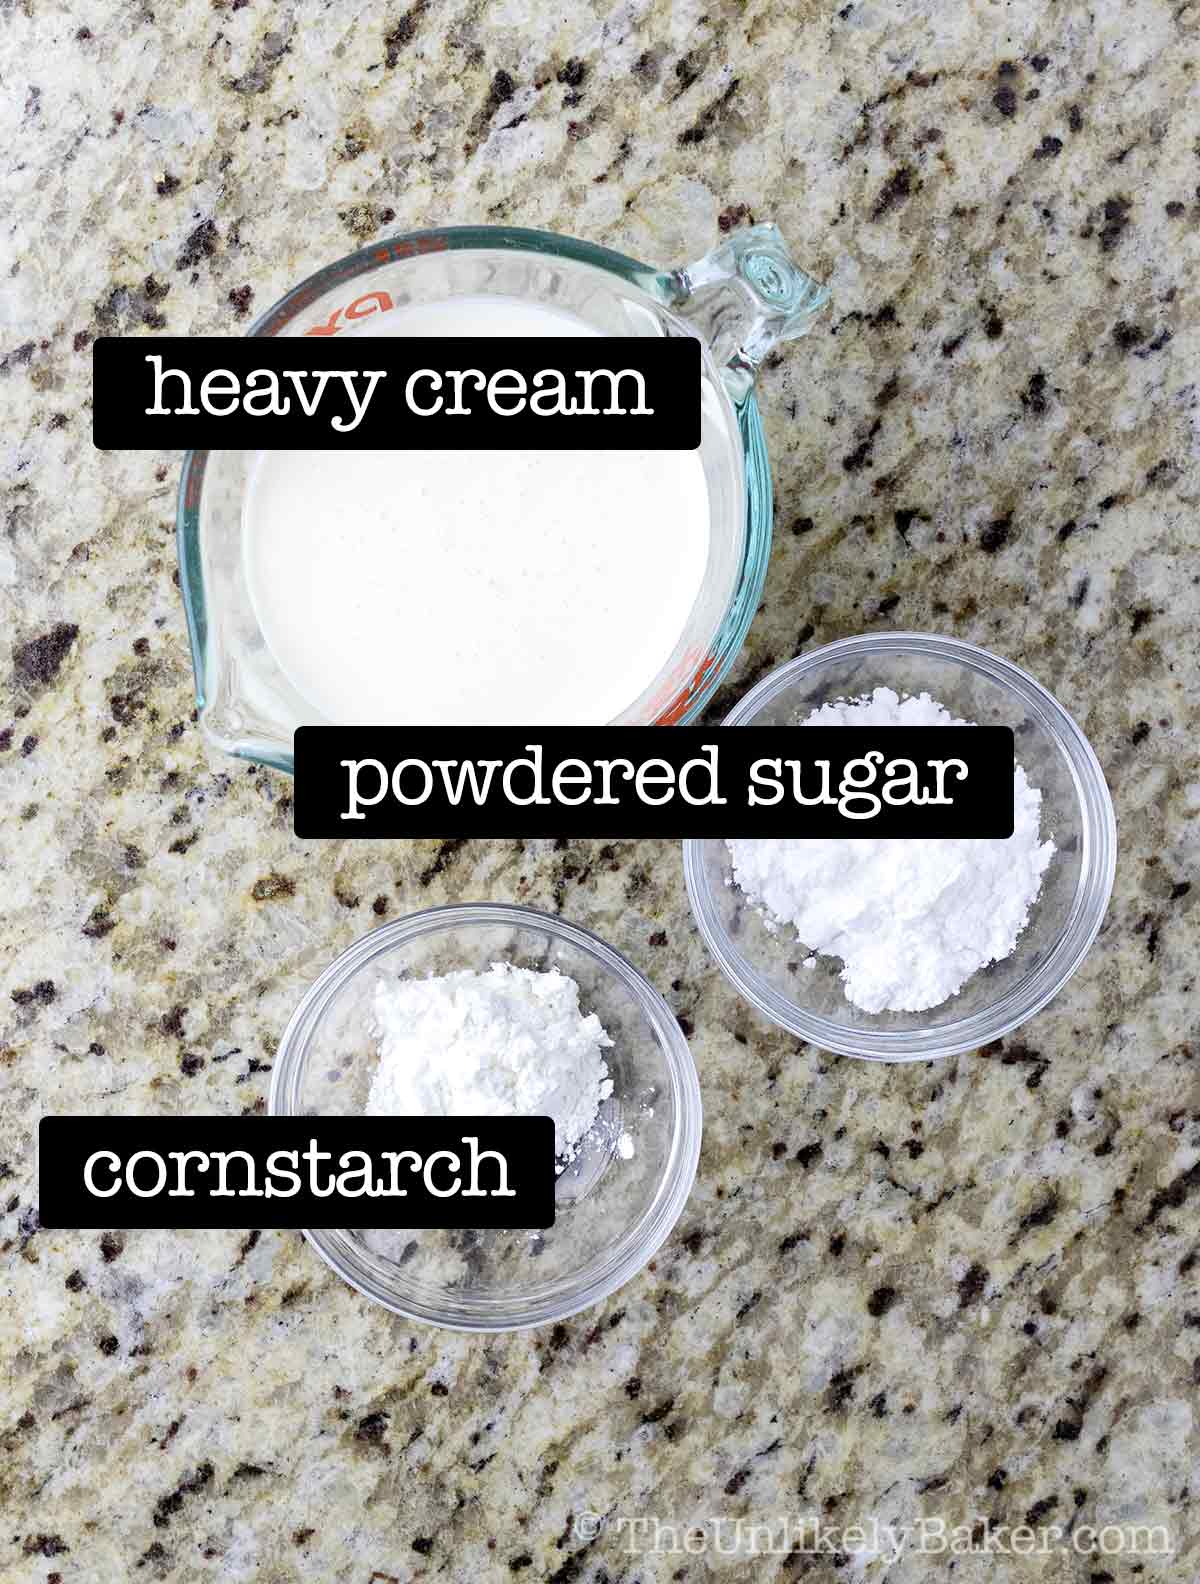 Ingredients for stabilized whipped cream with text overlay.